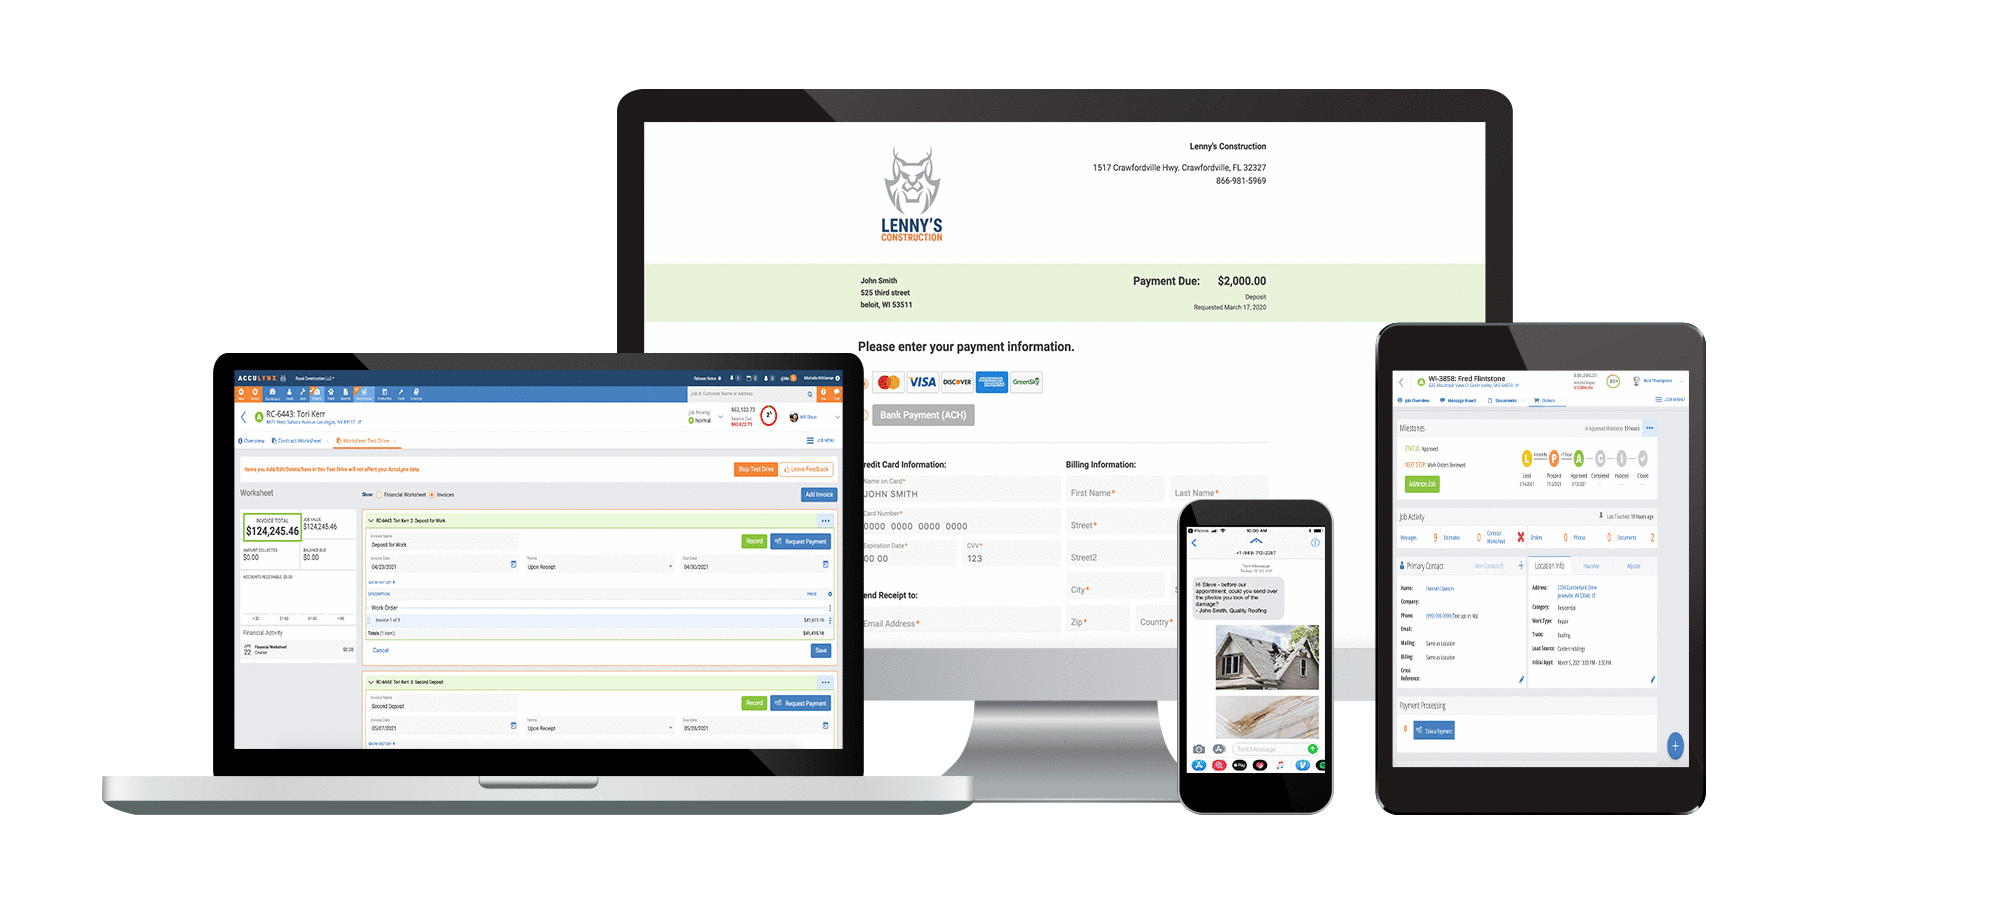 AccuLynx Software - AccuLynx is the all-in-one system that you need to run your roofing company. Track leads, manage jobs, collect payments, provide financing and so much more all within AccuLynx.